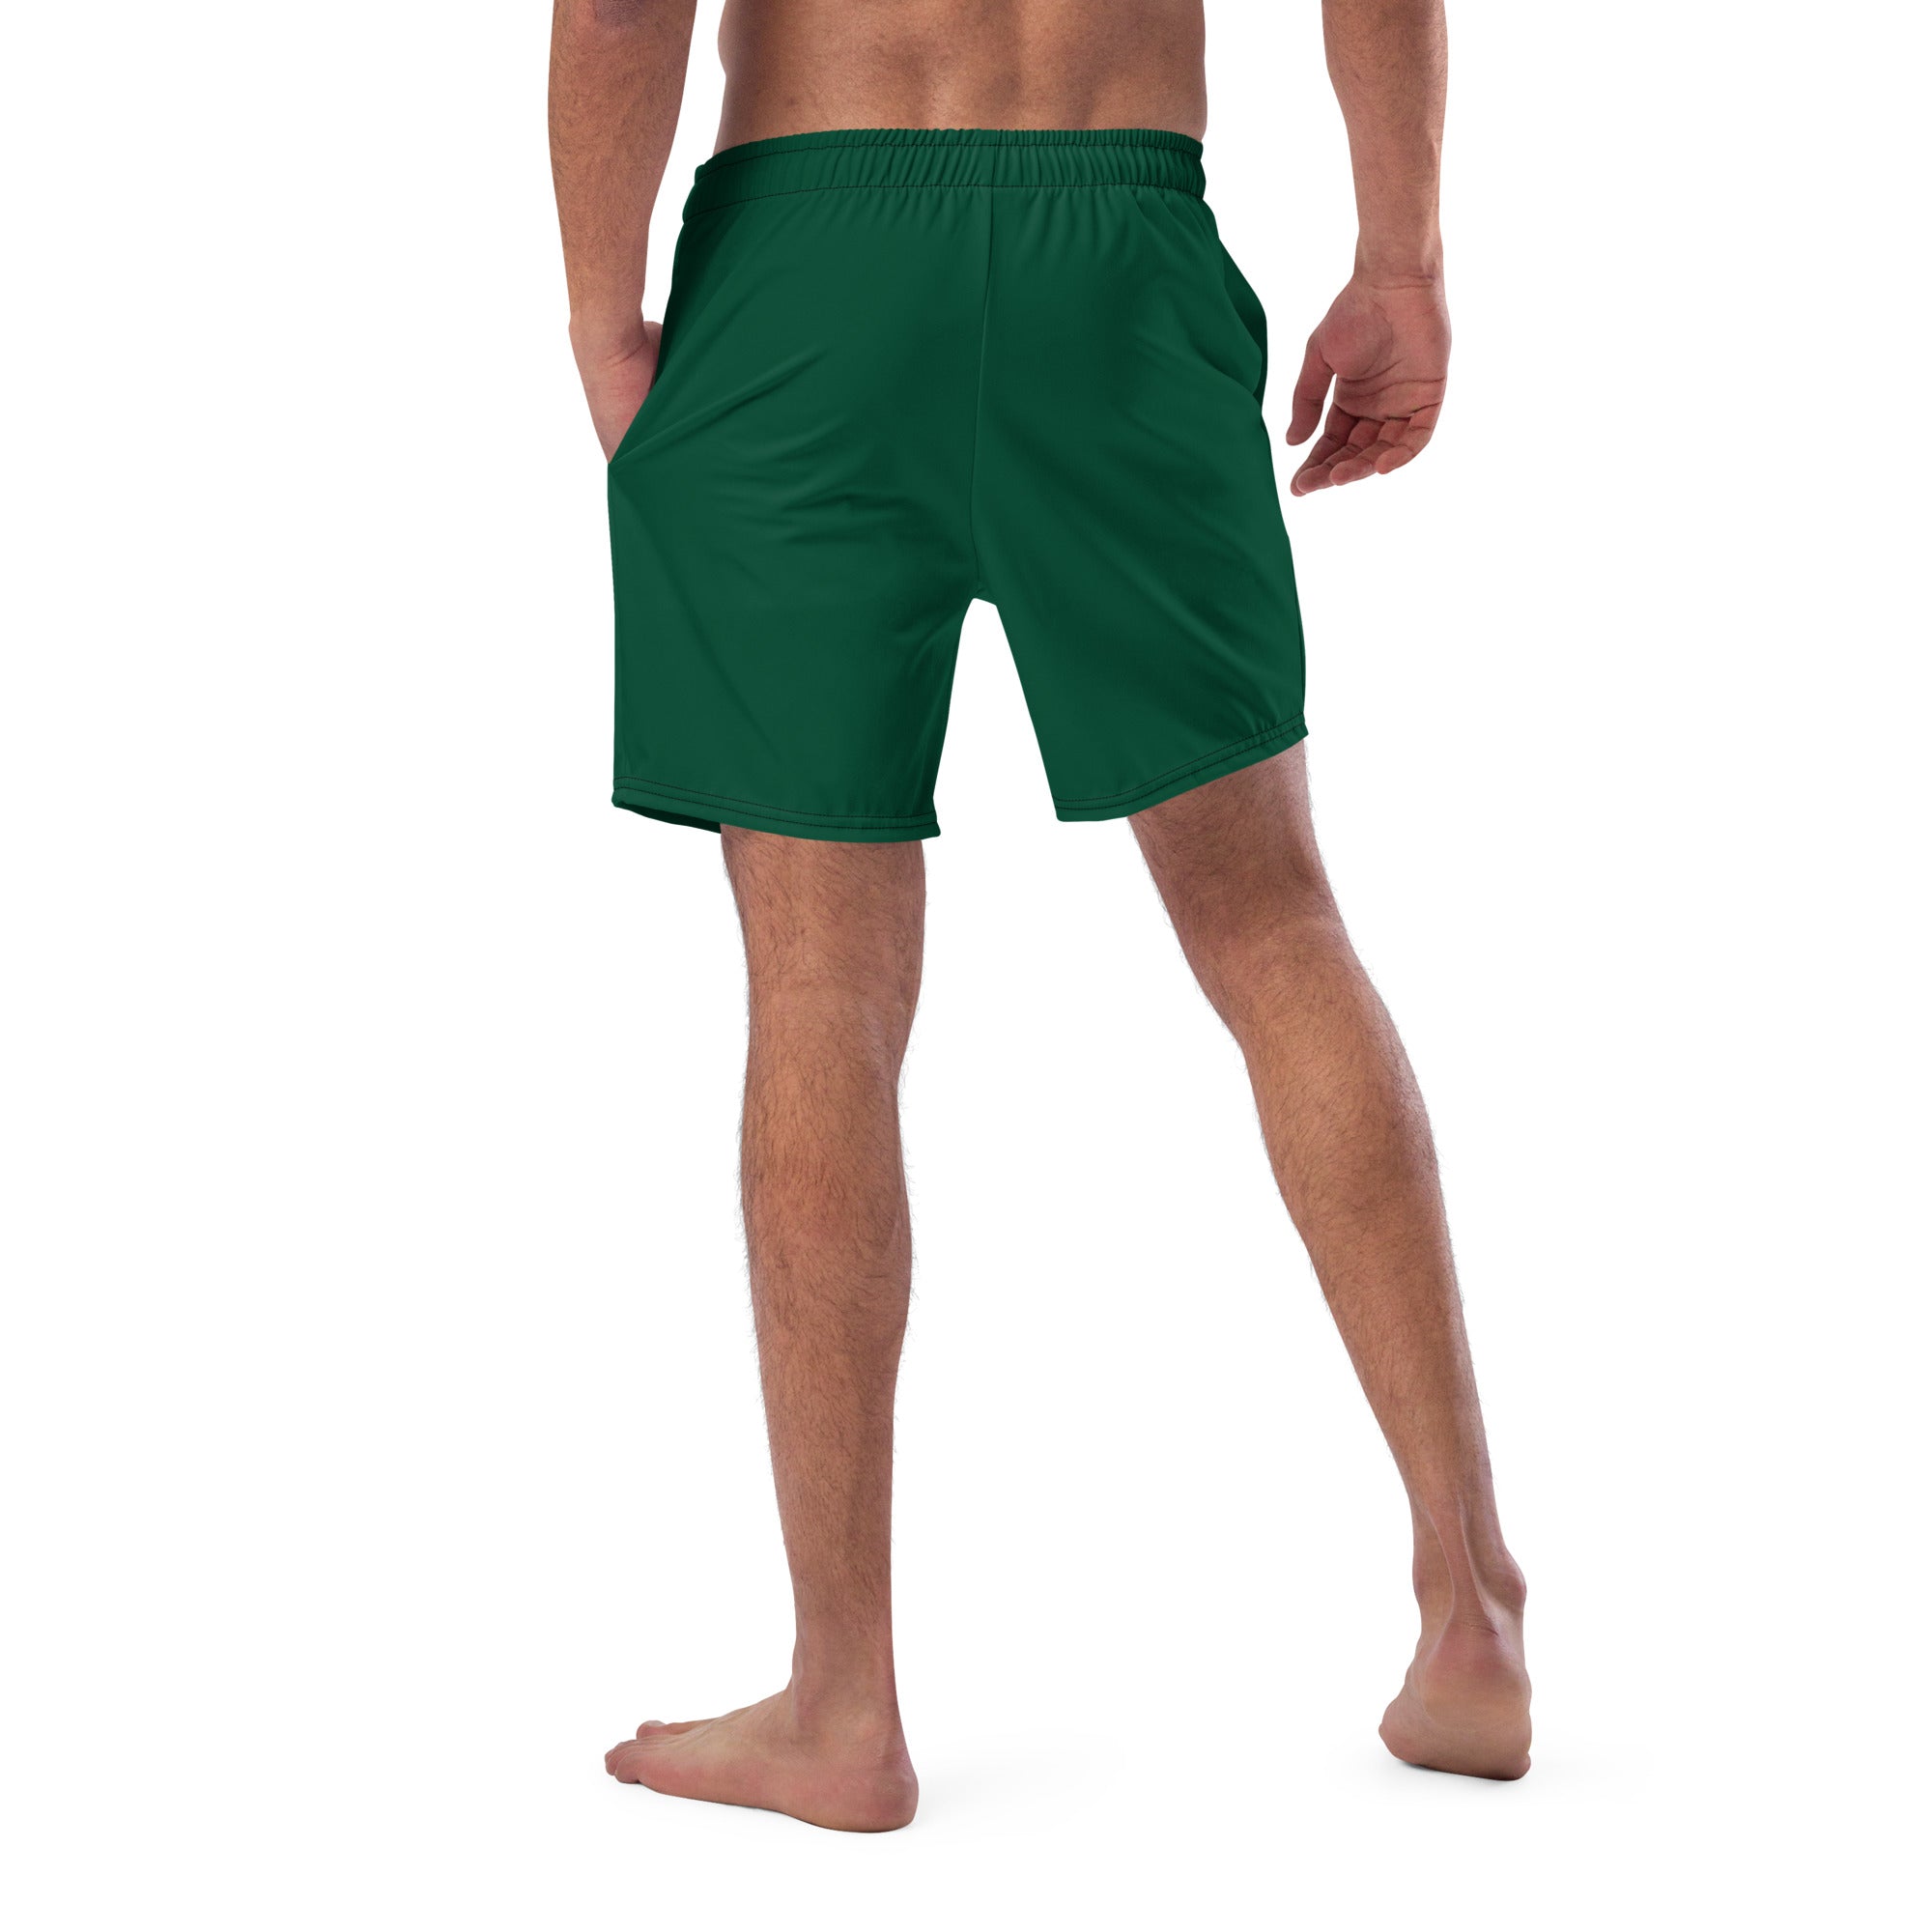 The Champagne Club - Eco Pool Short - The Refined Spirit